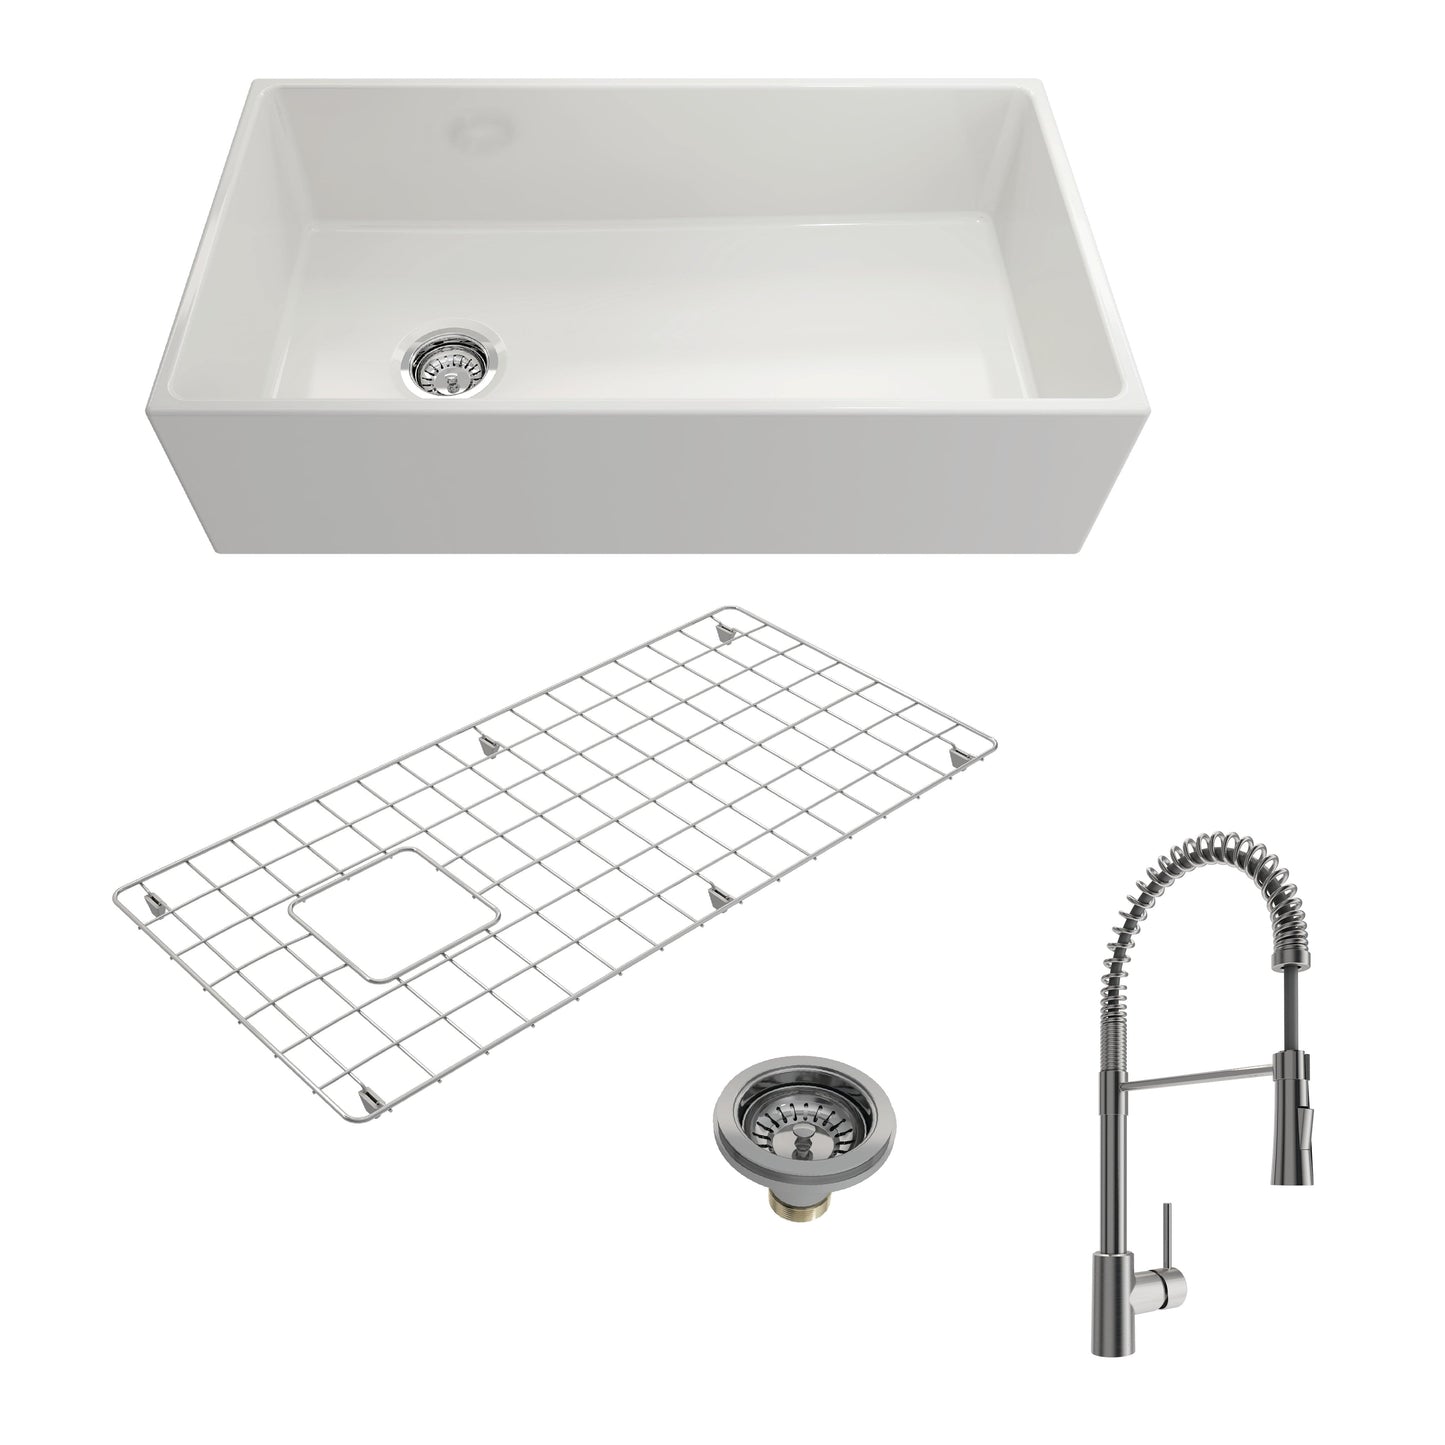 BOCCHI CONTEMPO 36" Fireclay Kitchen Sink with Protective Bottom Grid and Strainer with Livenza 2.0 Faucet